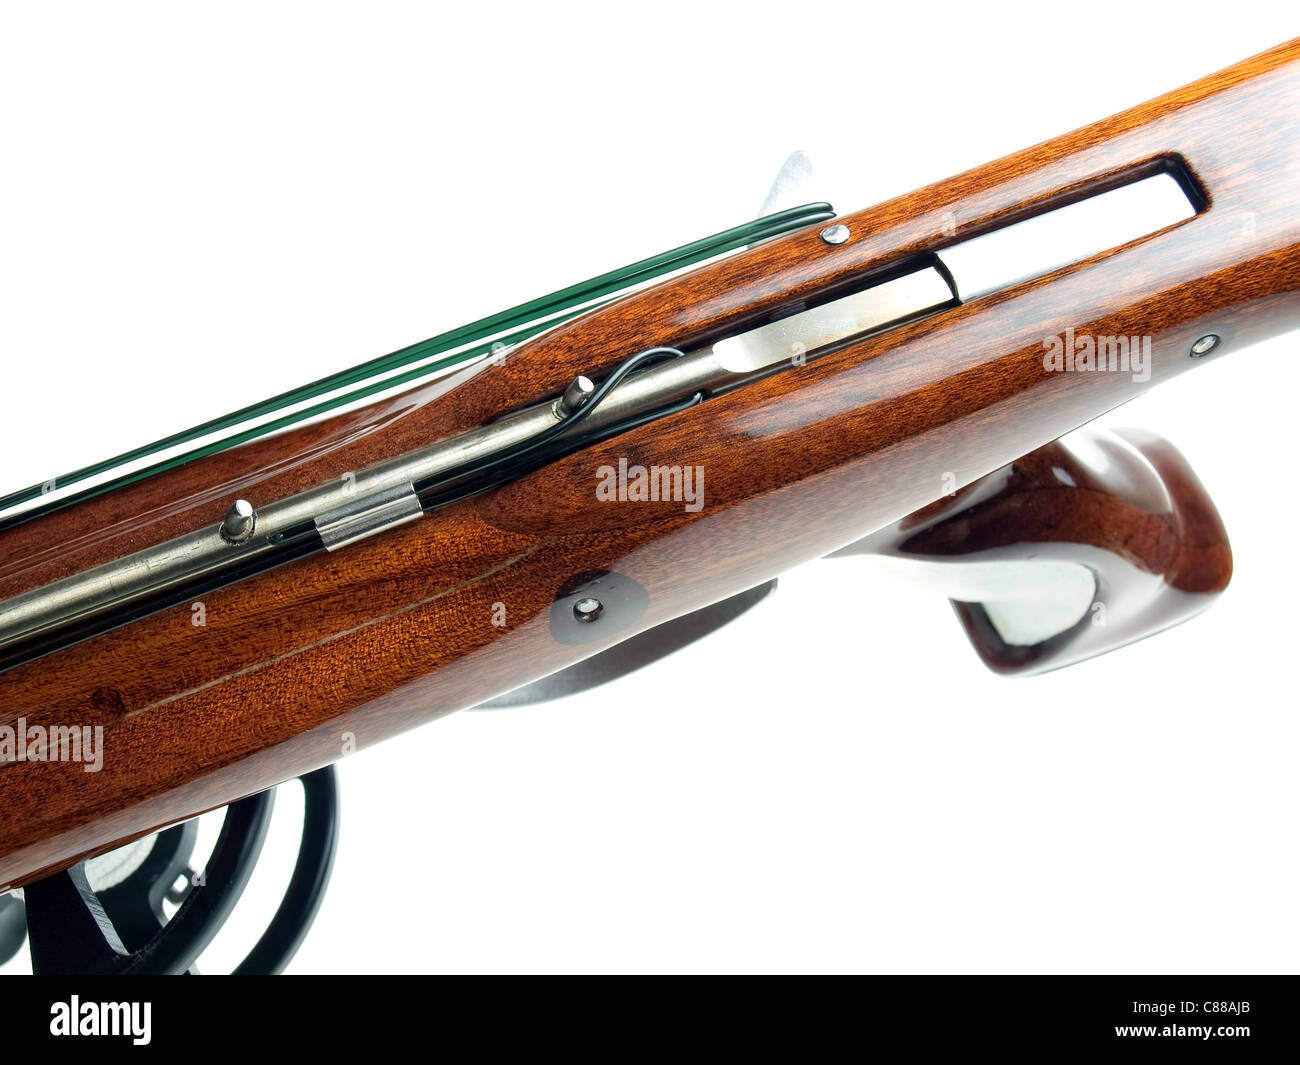 https://c8.alamy.com/comp/C88AJB/closeup-view-of-wooden-speargun-and-trigger-mechanism-on-a-white-background-C88AJB.jpg